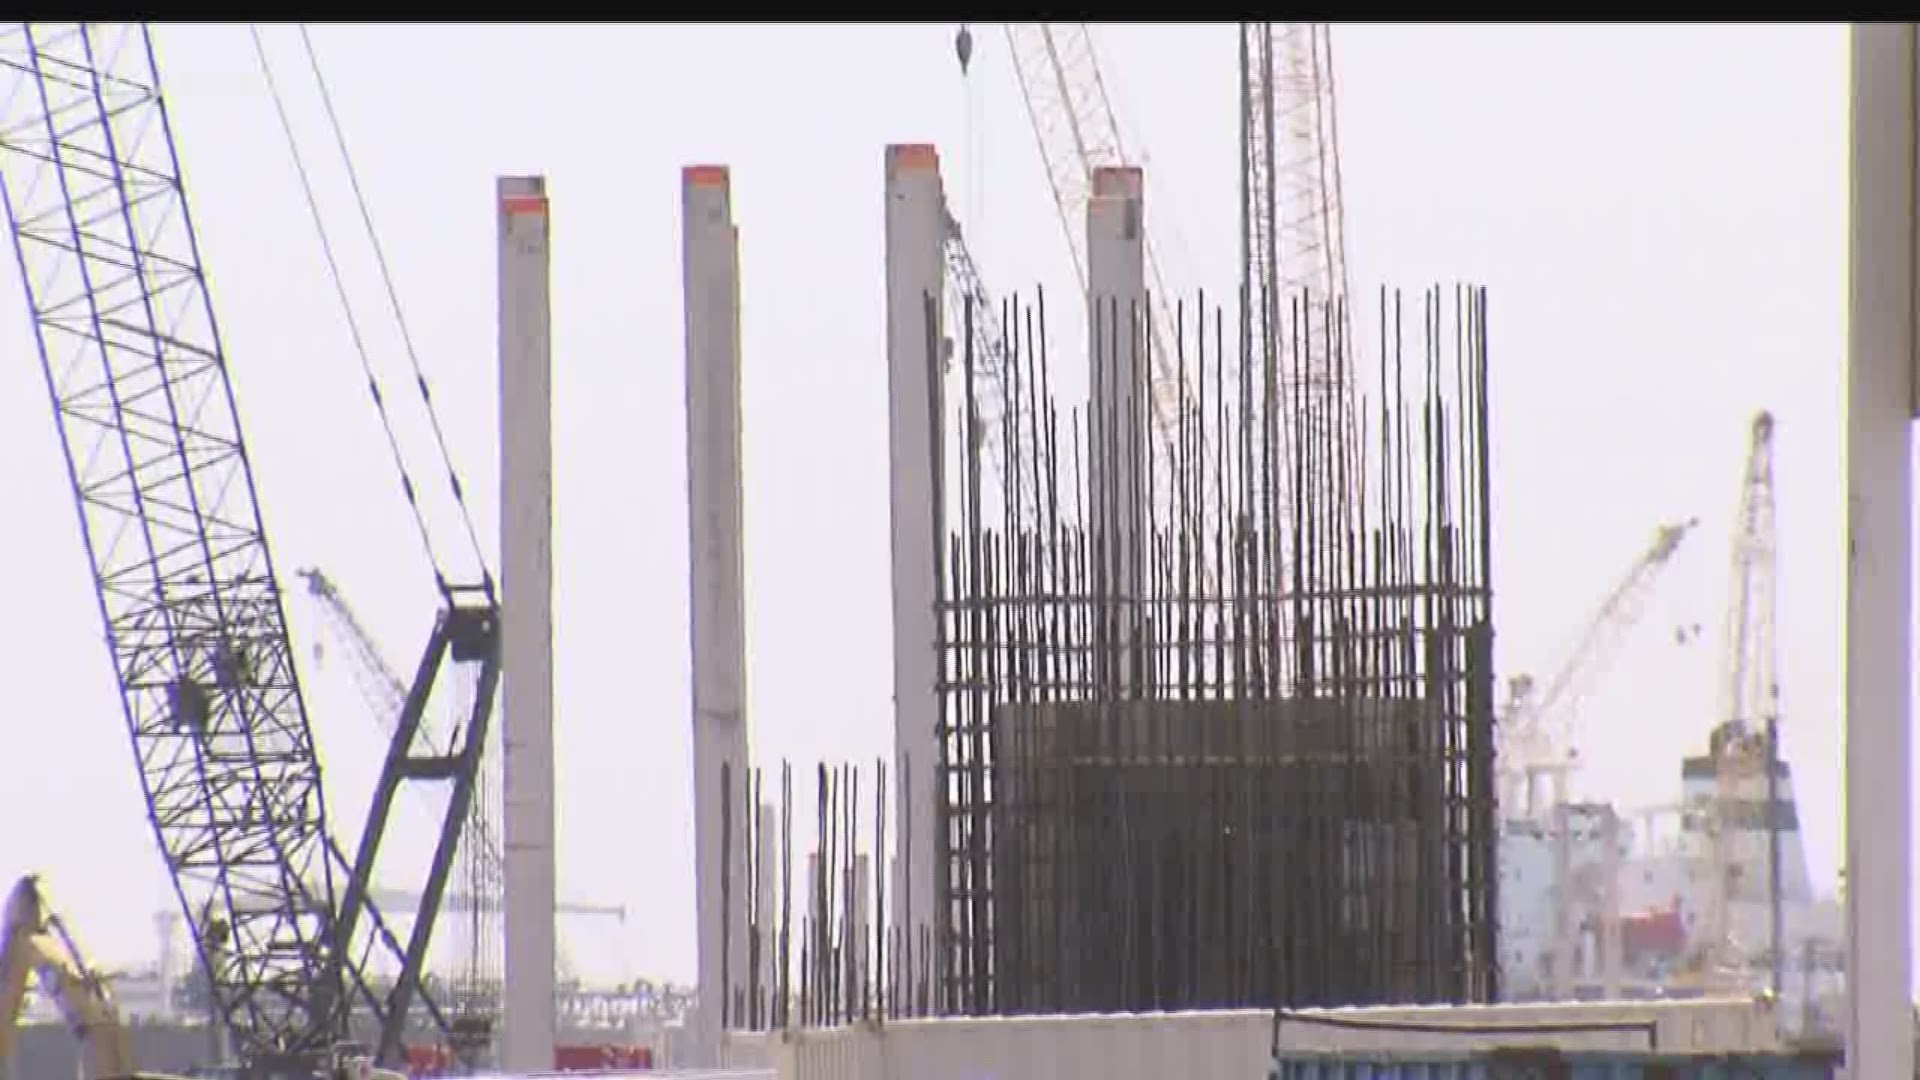 Many residents who spoke with 3News Tuesday had questions about FIGG Engineering's involvement with the new Harbor Bridge Project after seeing what happened in Florida.